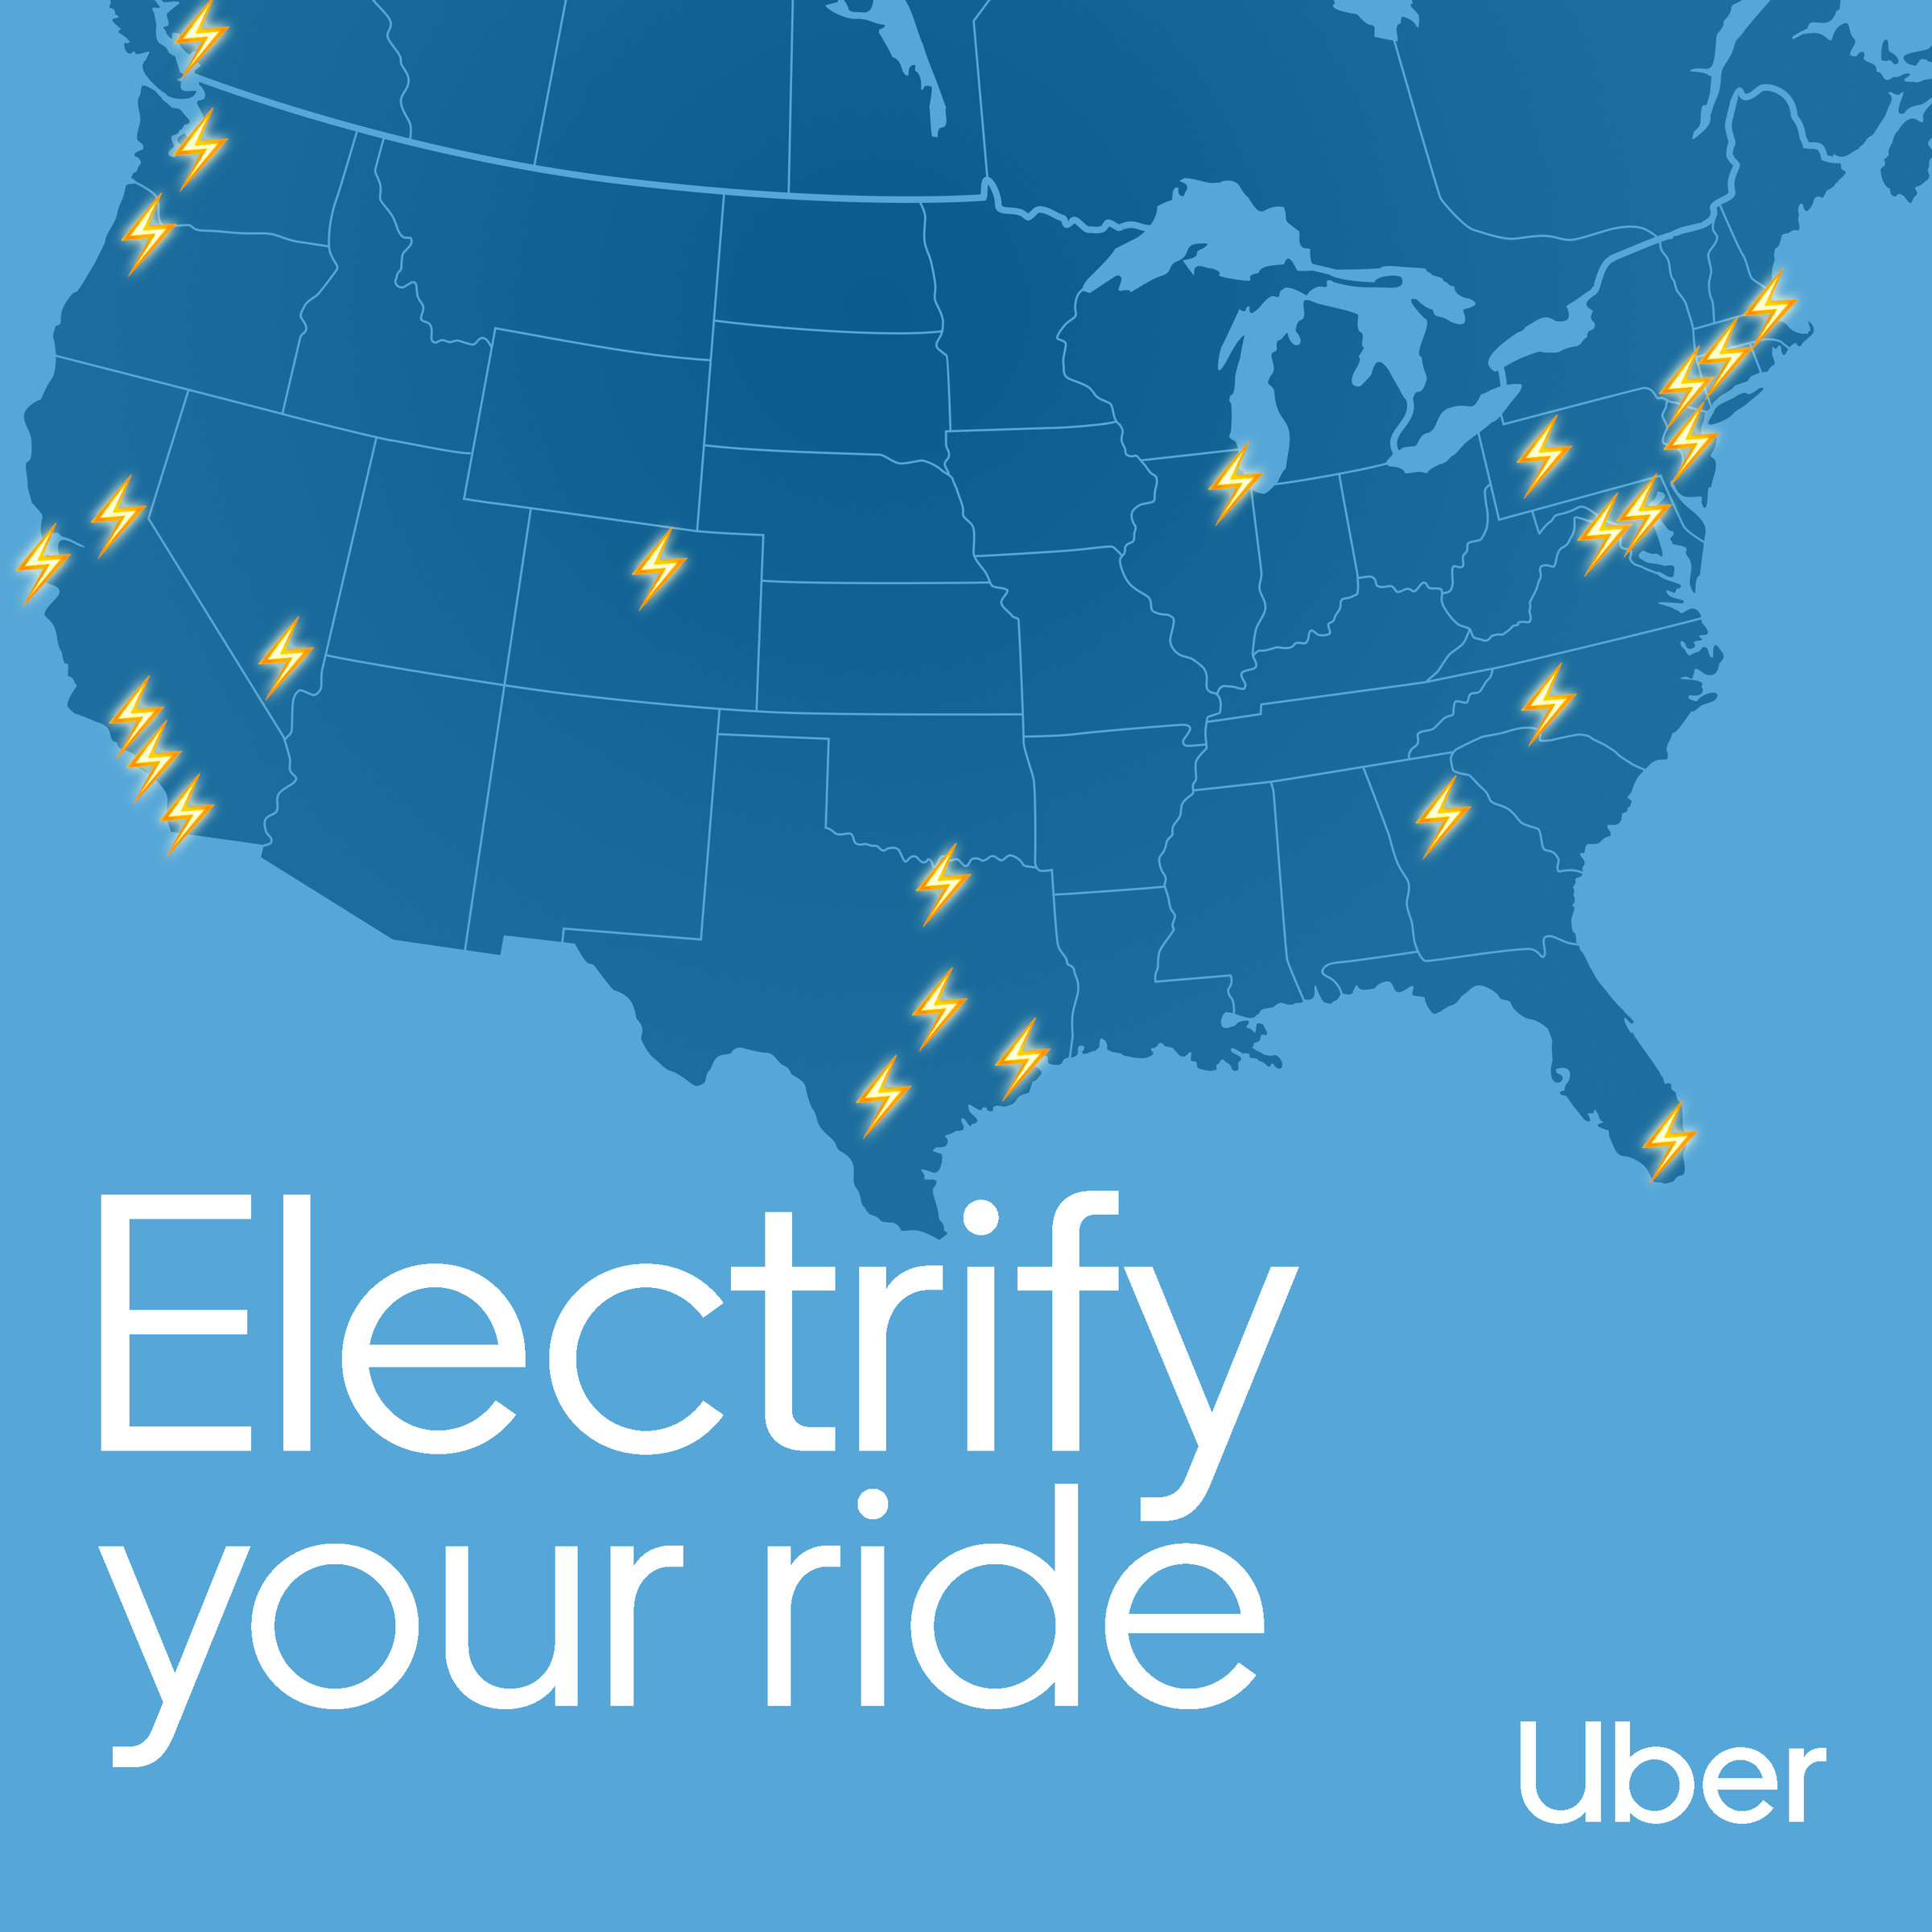 Uber Comfort Electric is available in 25 cities in North America.